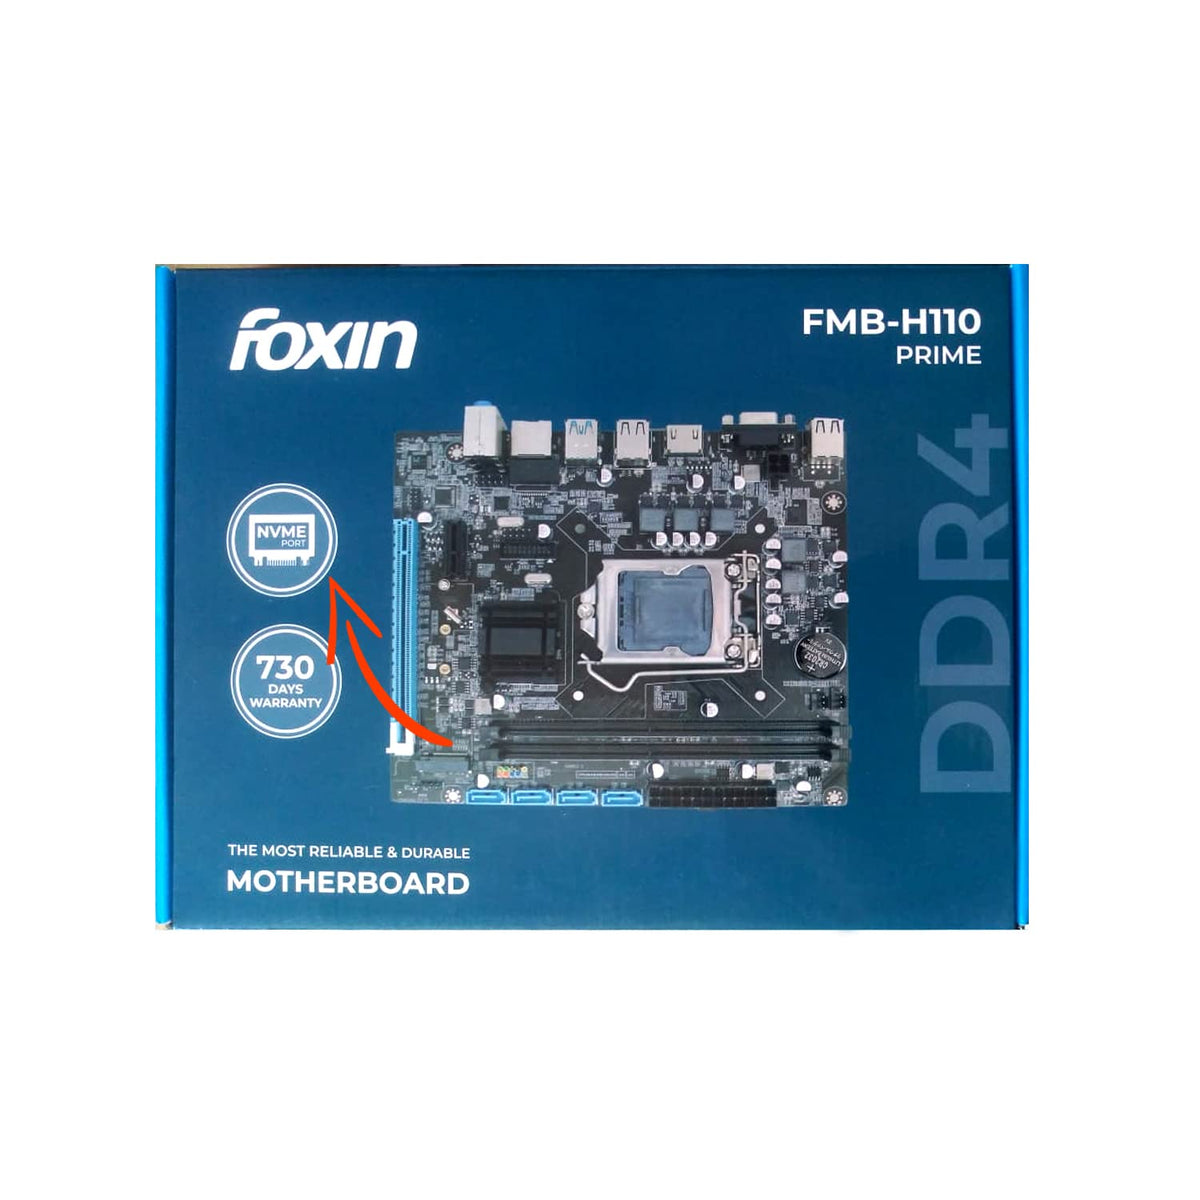 Foxin FMB H110 PRIME Motherboard